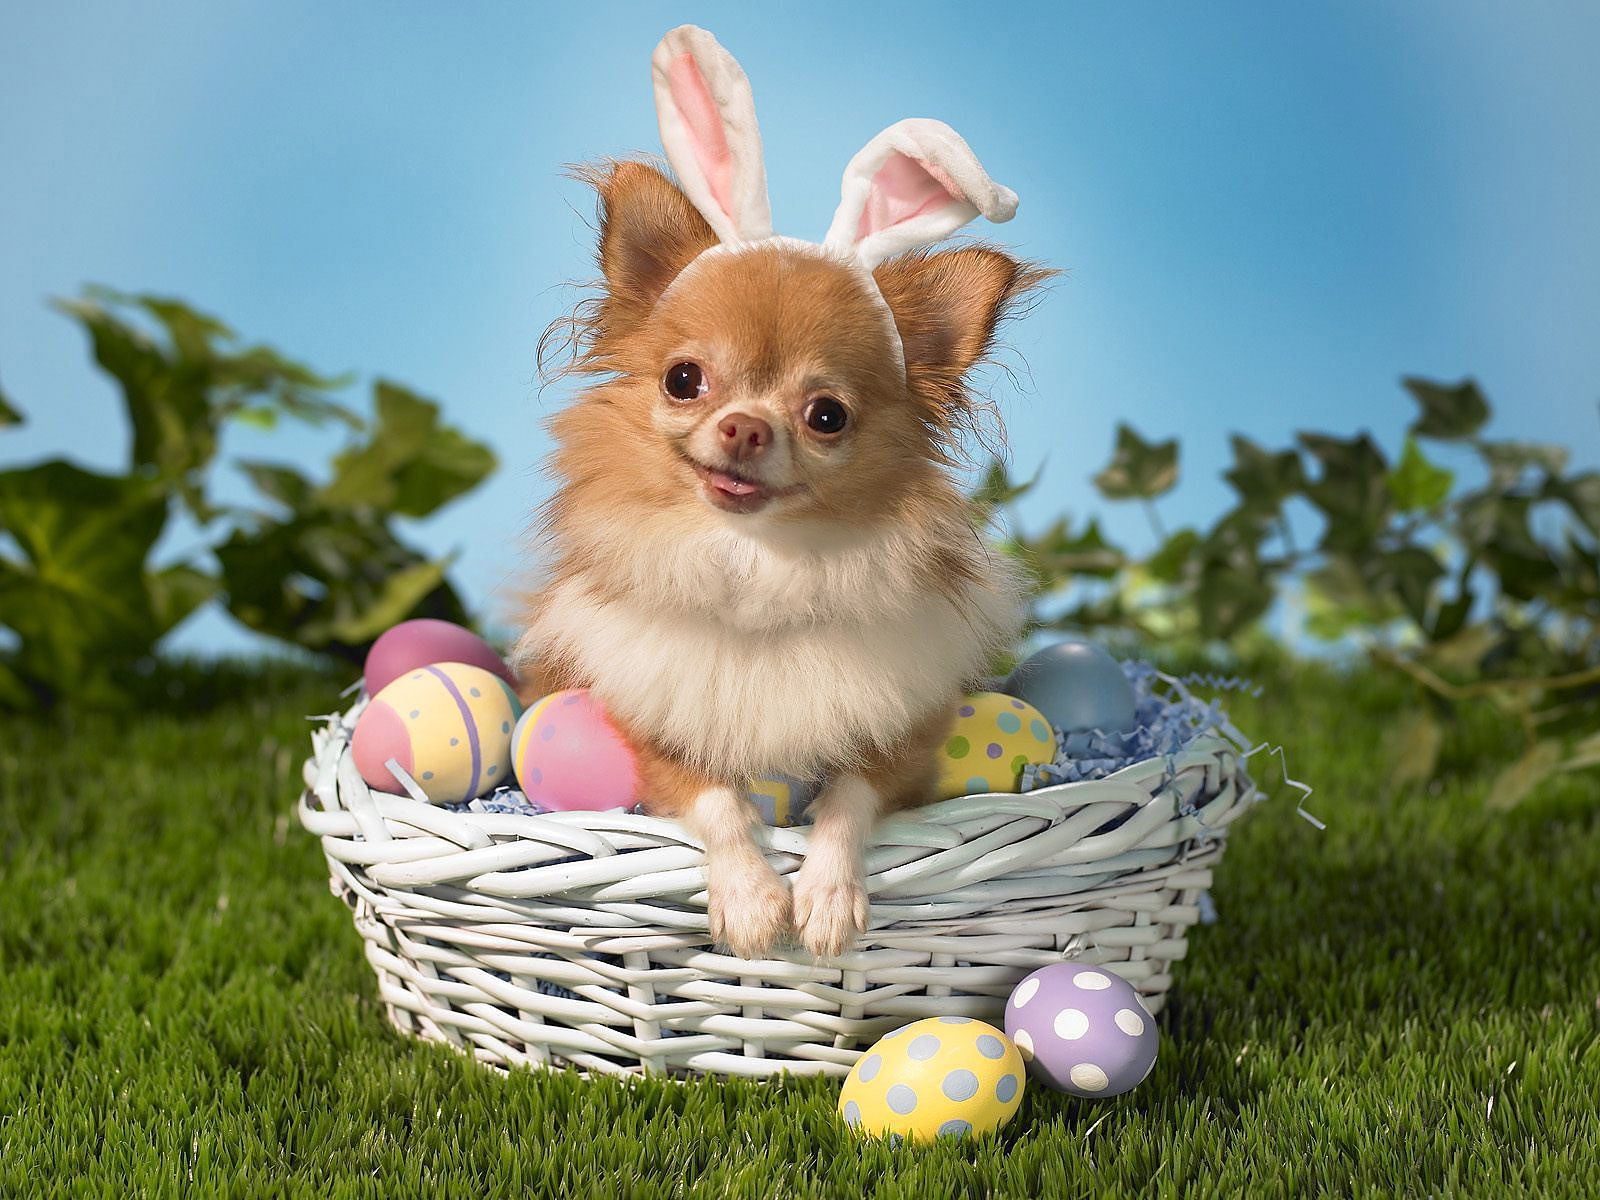 Background And Posters: Easter Wallpaper #Easter #Background #Wallpaper. Easter dog, Easter pets, Animals